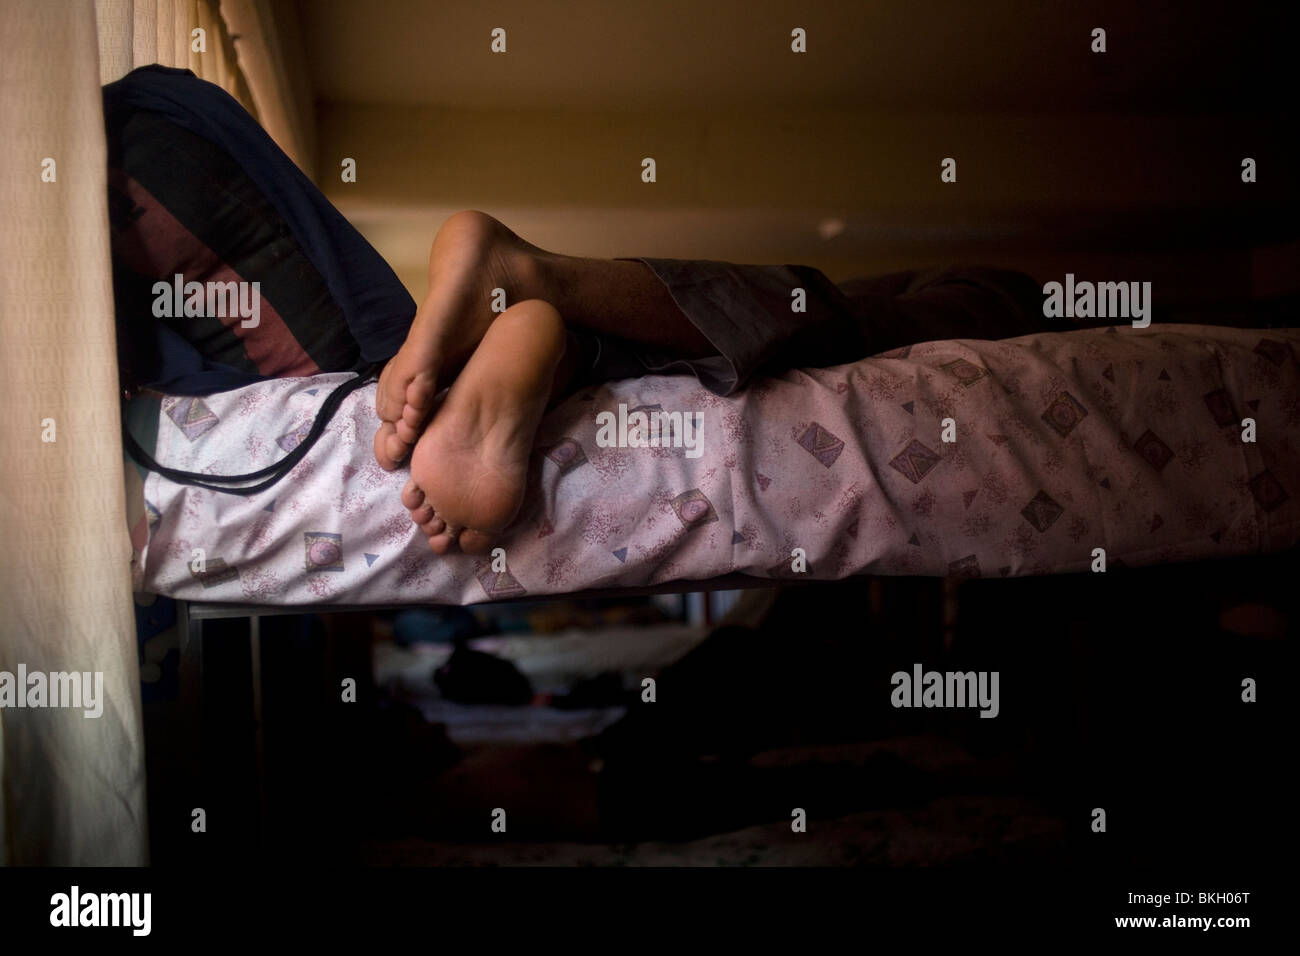 An undocumented Central American migrant sleeps in a shelter for migrants located along the railroad in Mexico City Stock Photo